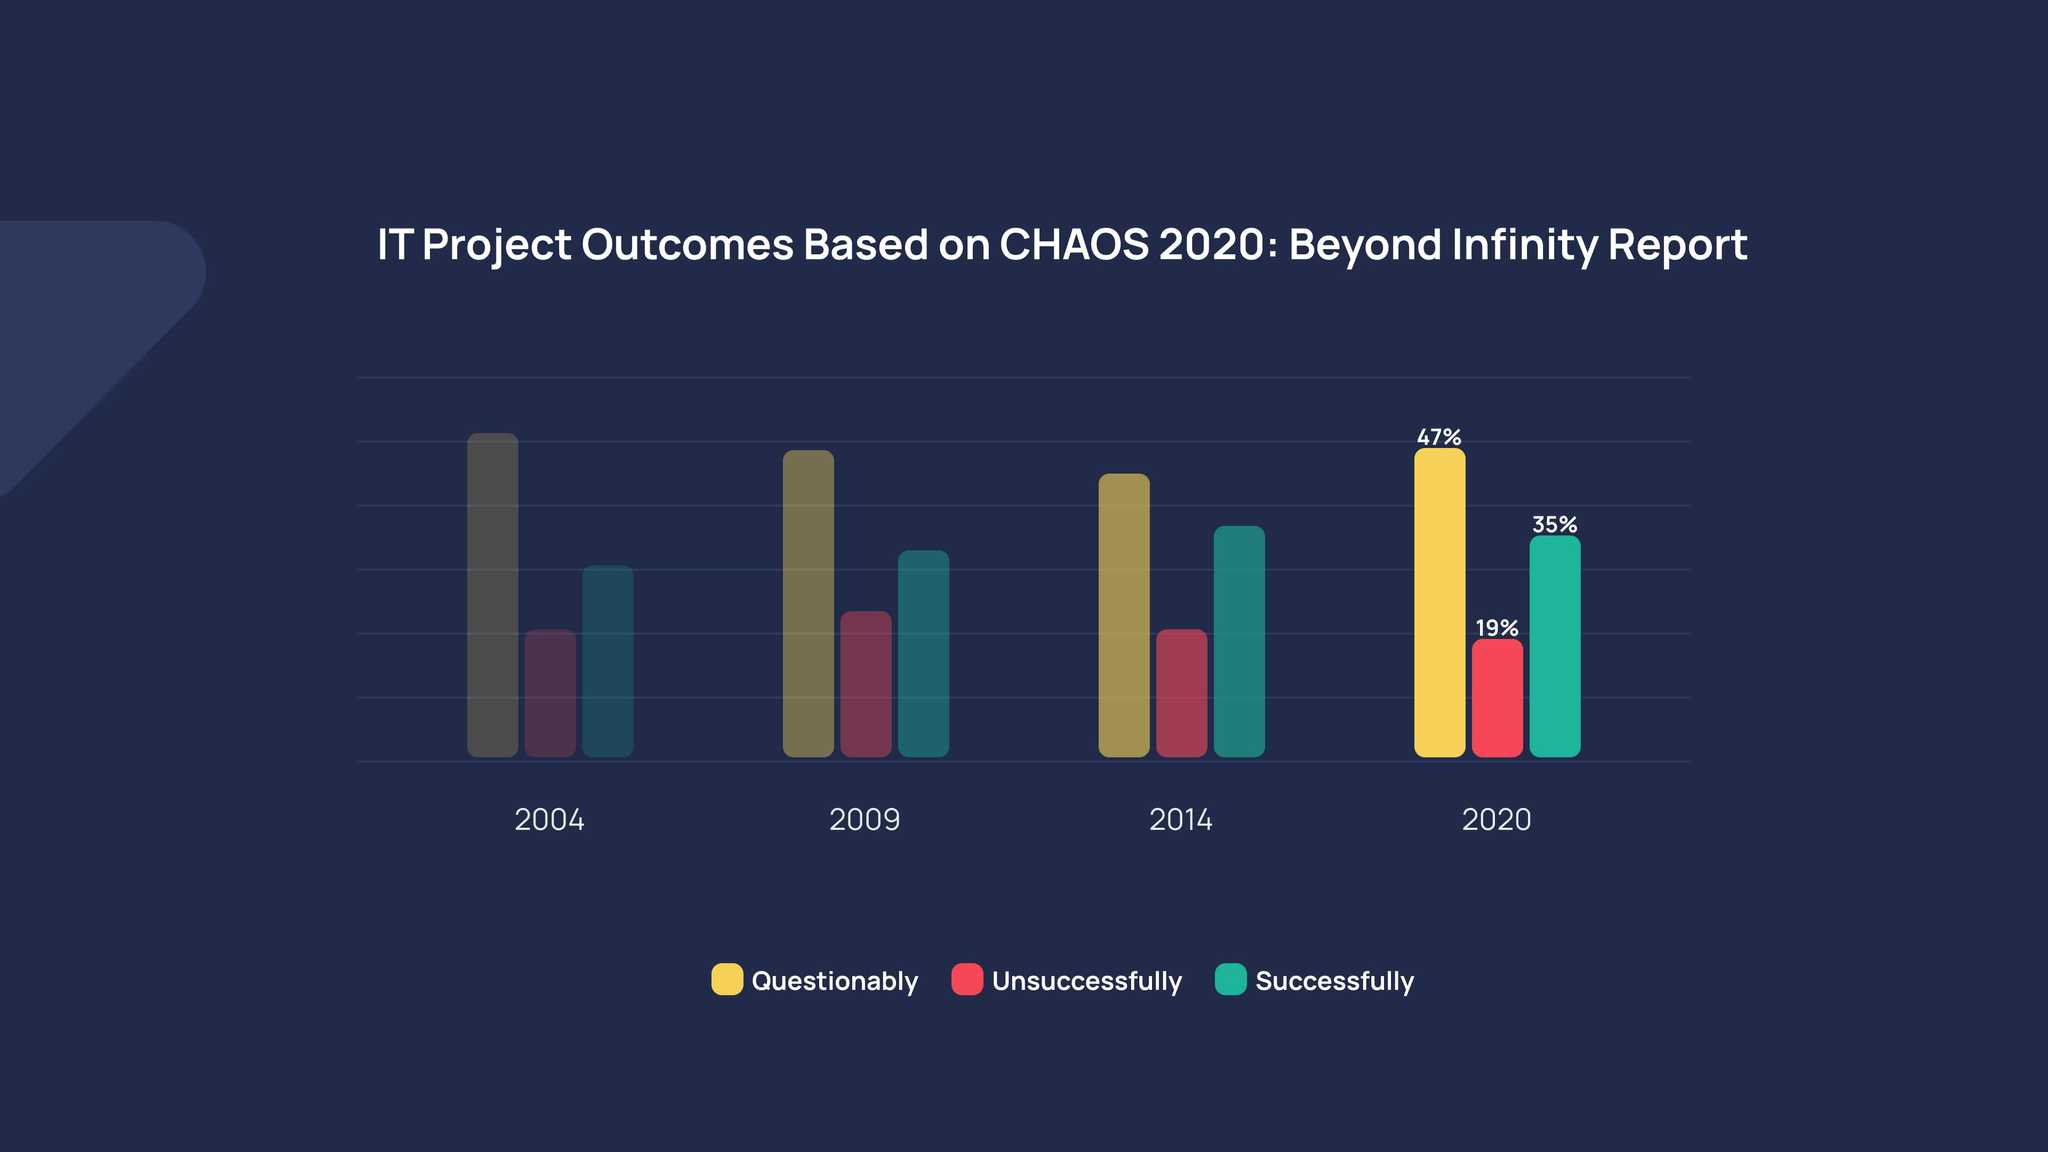 IT Project Outcomes Based on CHAOS 2020: Beyond Infinity Report